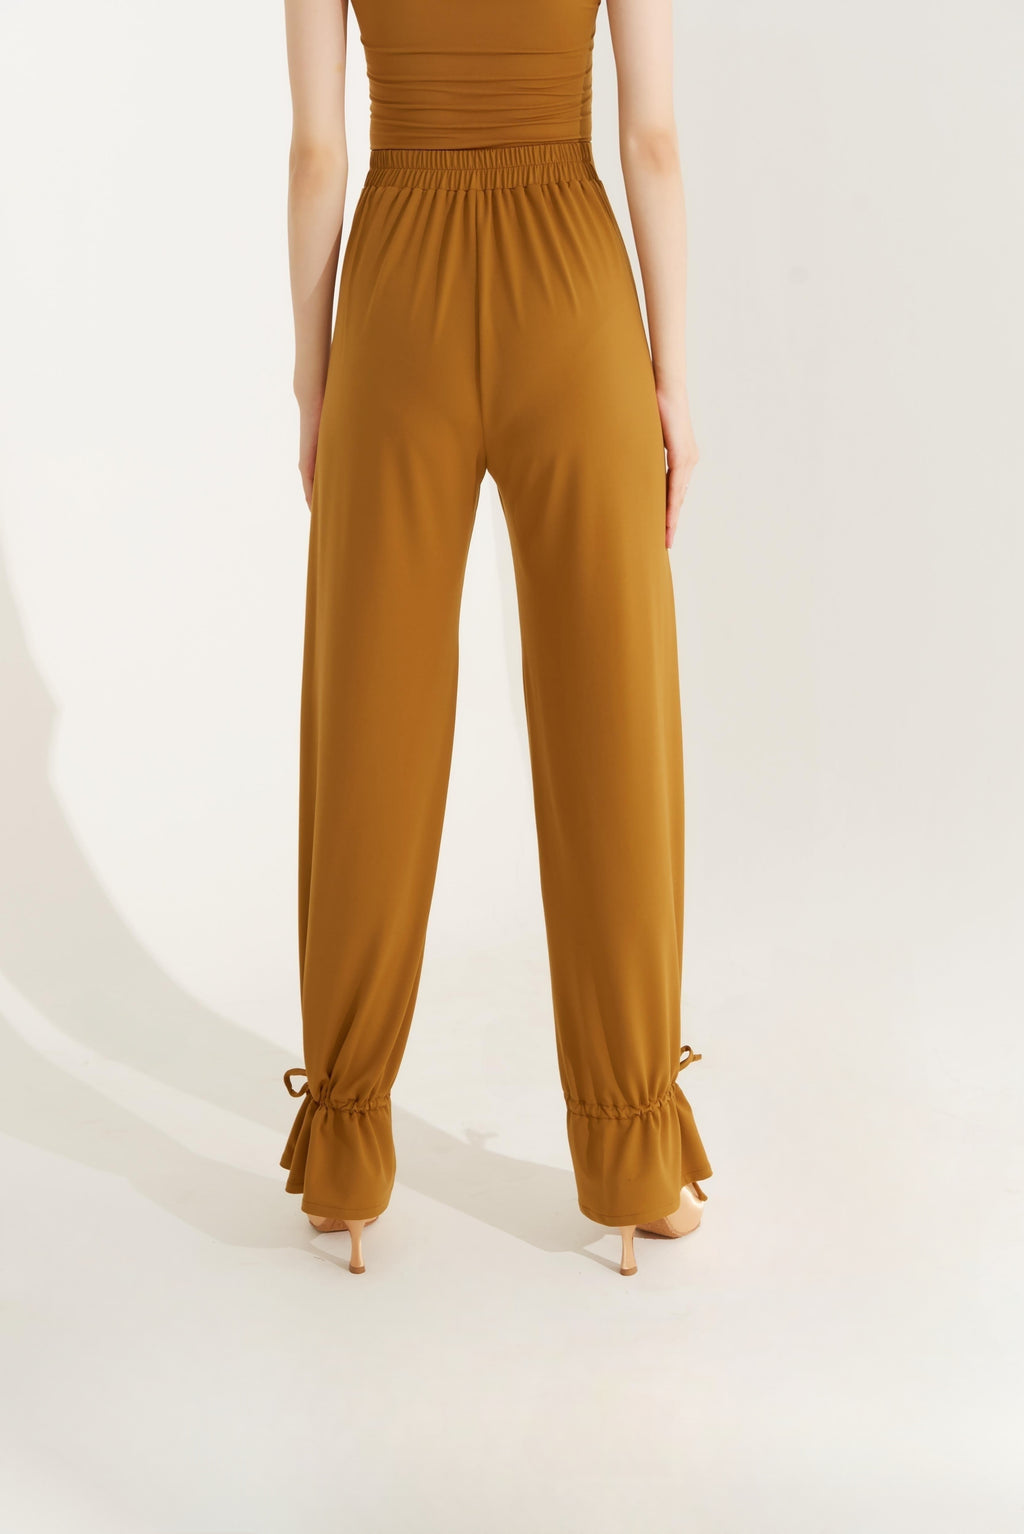 DQ-266  DANCE QUEEN Ankle Strap Trousers